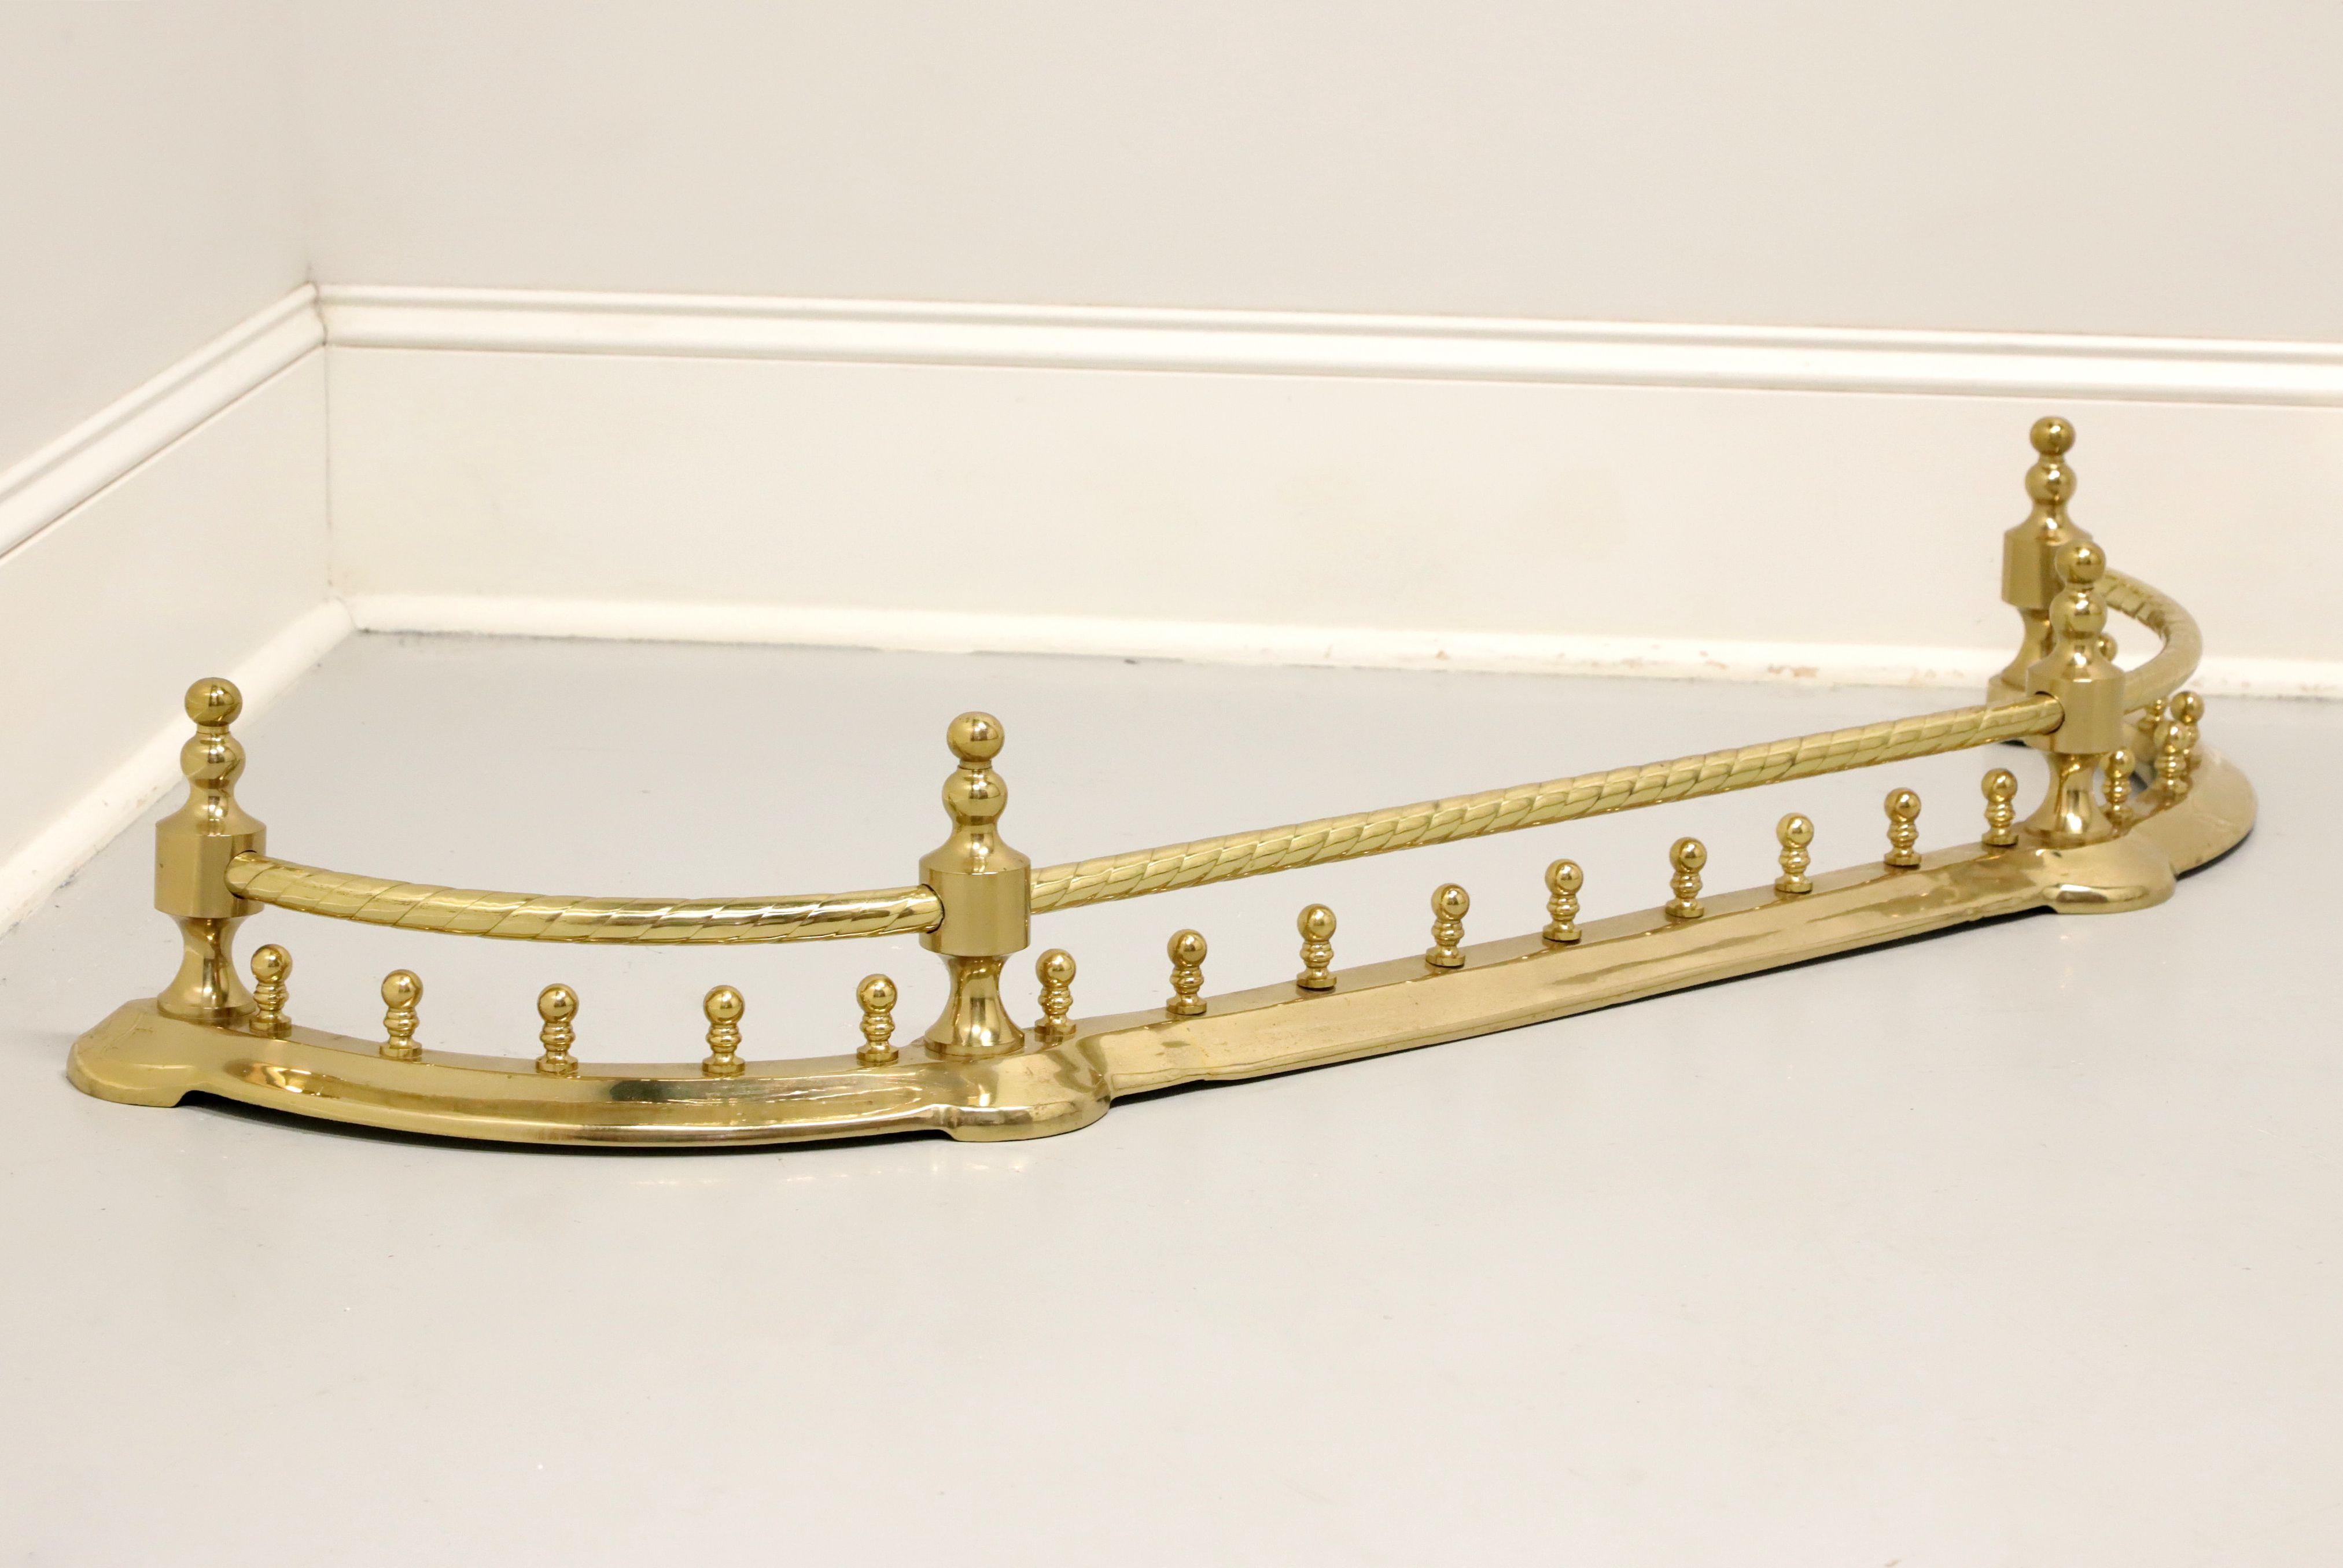 A Traditional style fireplace fender by Decorative Crafts. Solid hand crafted brass with a lacquered finish. Features an arched shape, swirl effect to top rail, four finial capped posts, and multiple decorative rounded posts to wider lower rail. No